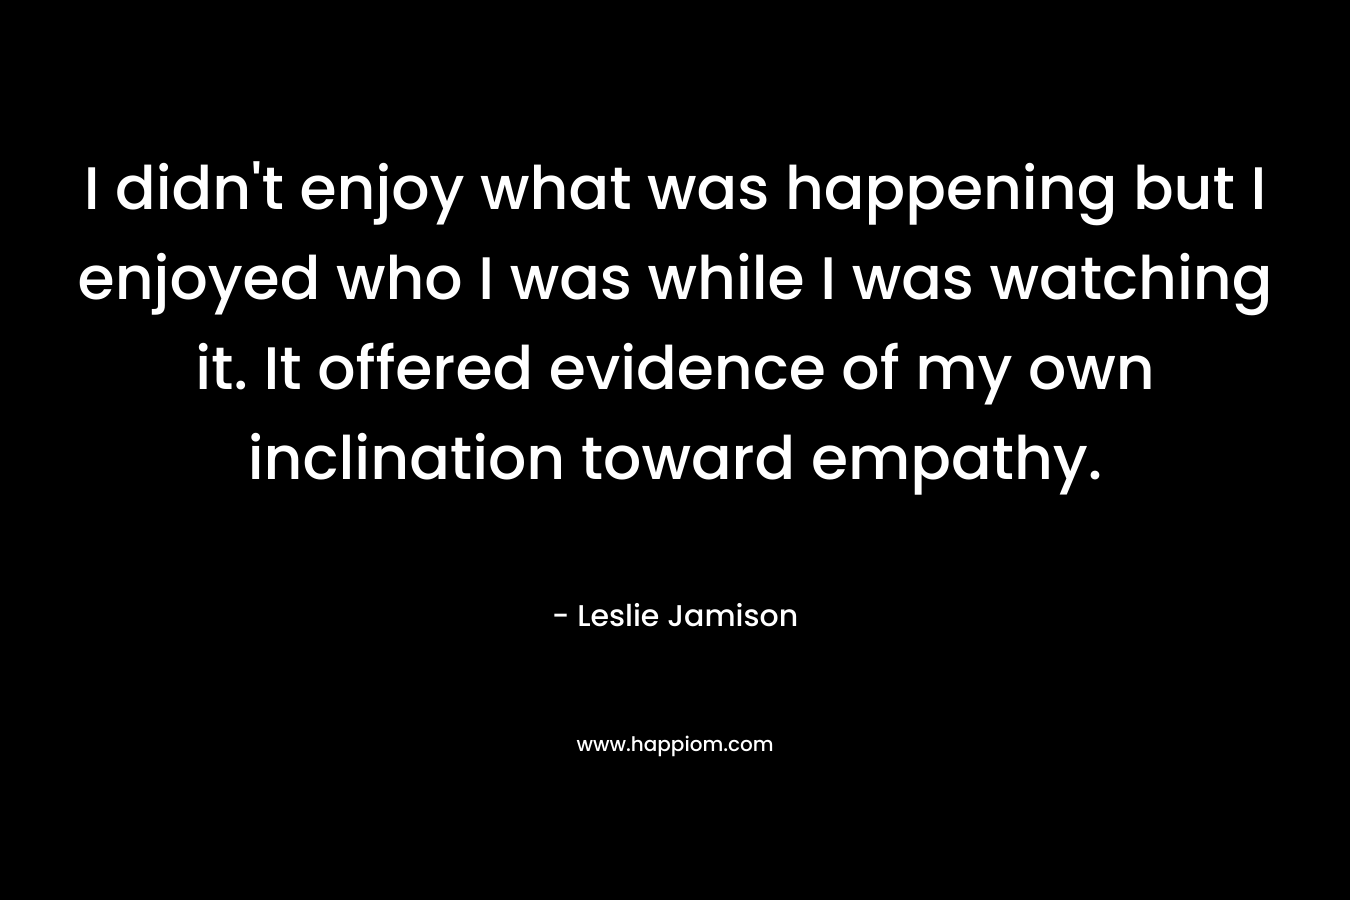 I didn’t enjoy what was happening but I enjoyed who I was while I was watching it. It offered evidence of my own inclination toward empathy. – Leslie Jamison